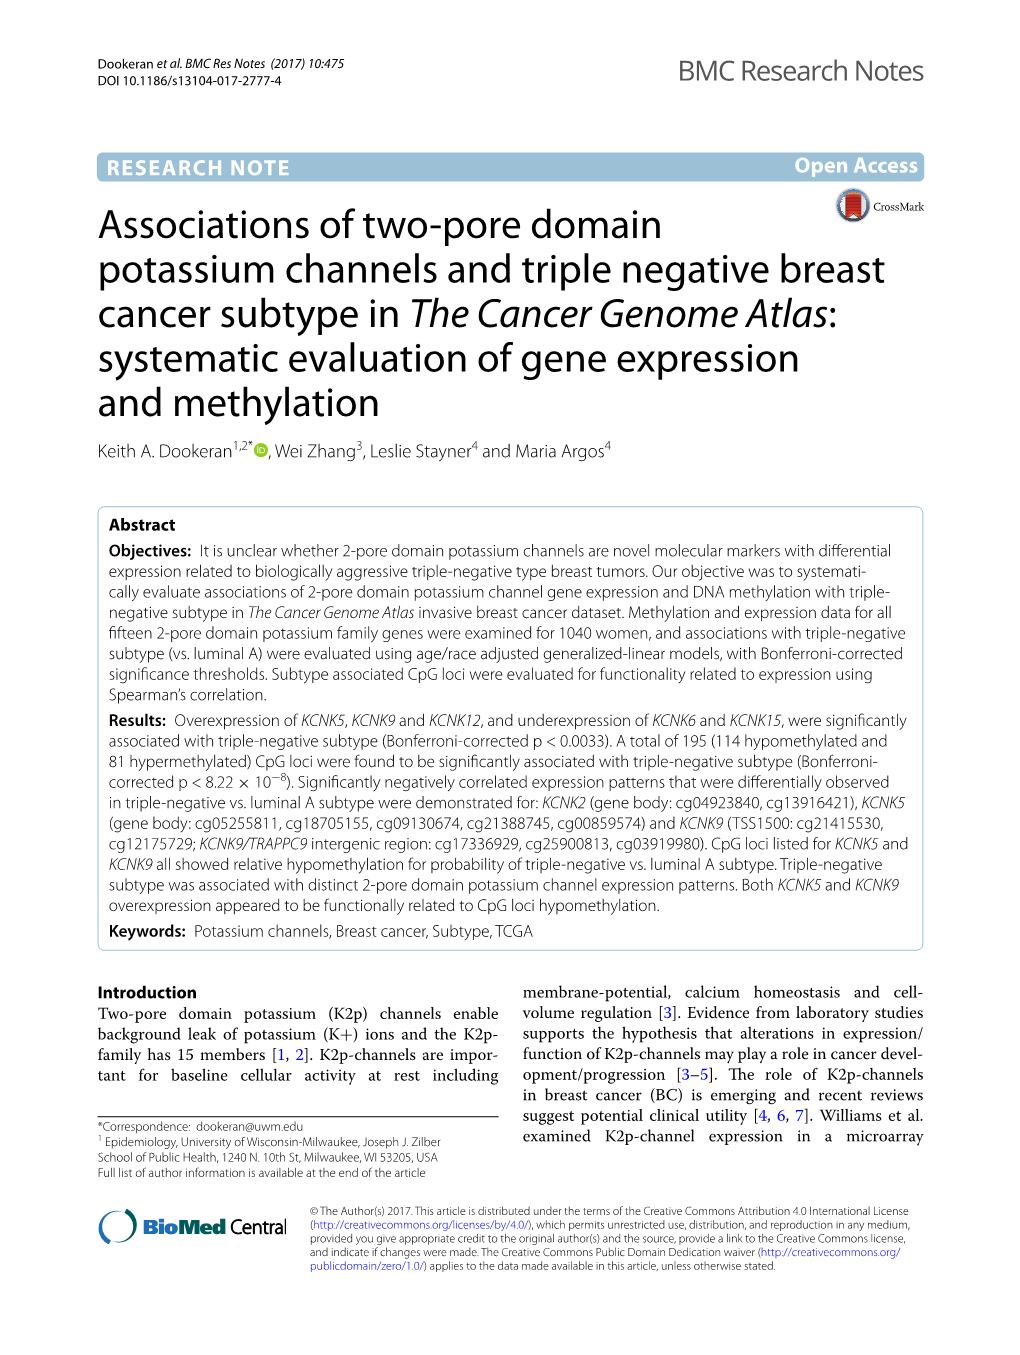 Associations of Two-Pore Domain Potassium Channels and Triple